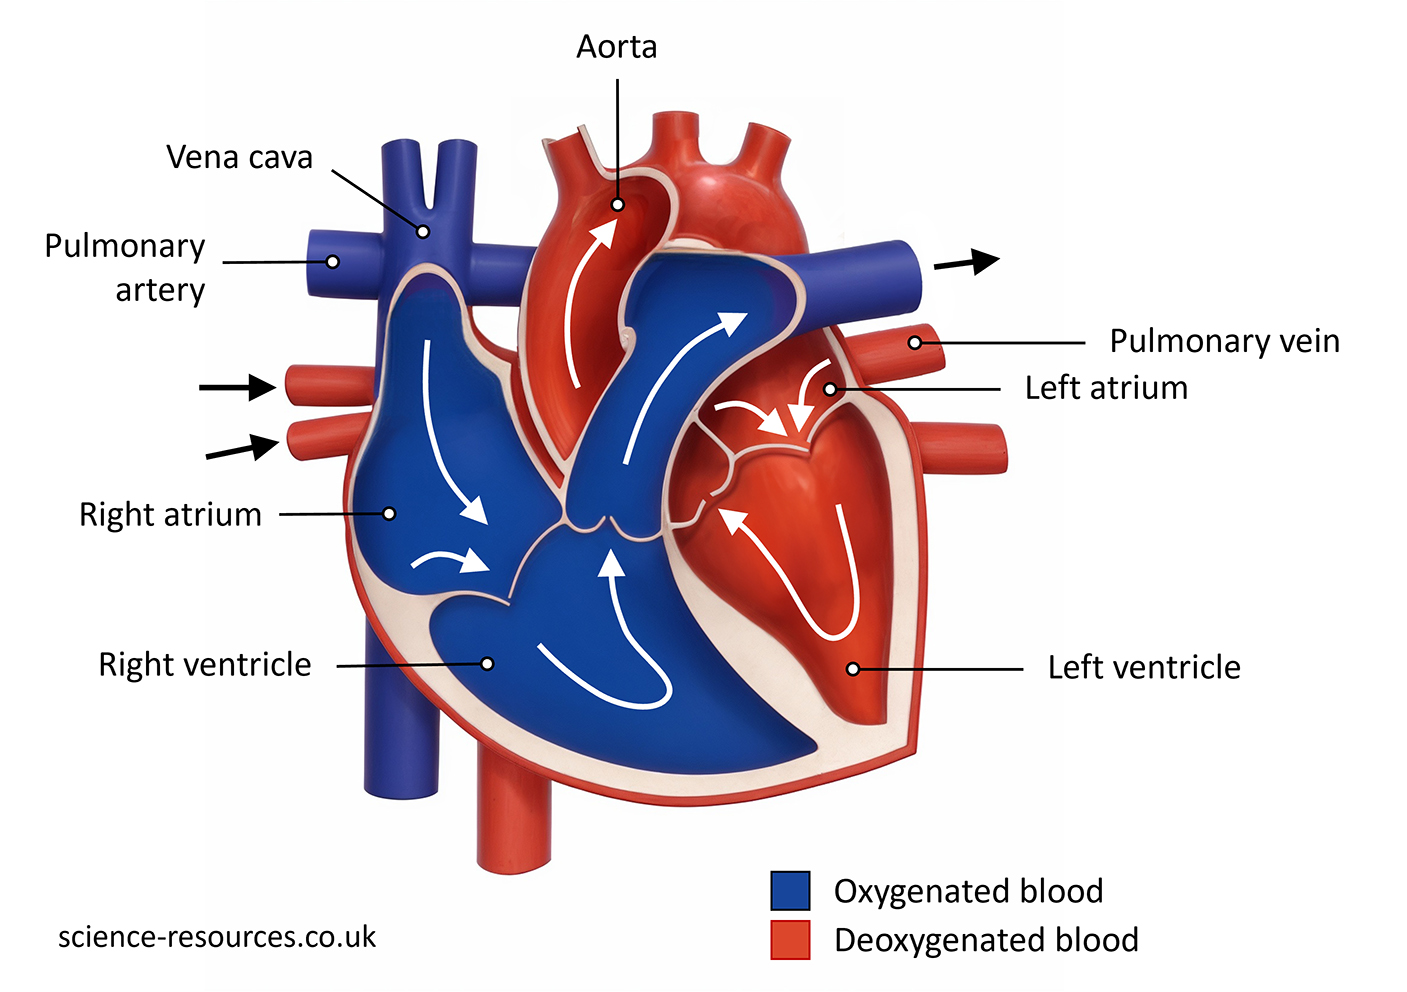 This image is a detailed diagram of the human heart, showcasing its various parts and the flow of oxygenated and deoxygenated blood.